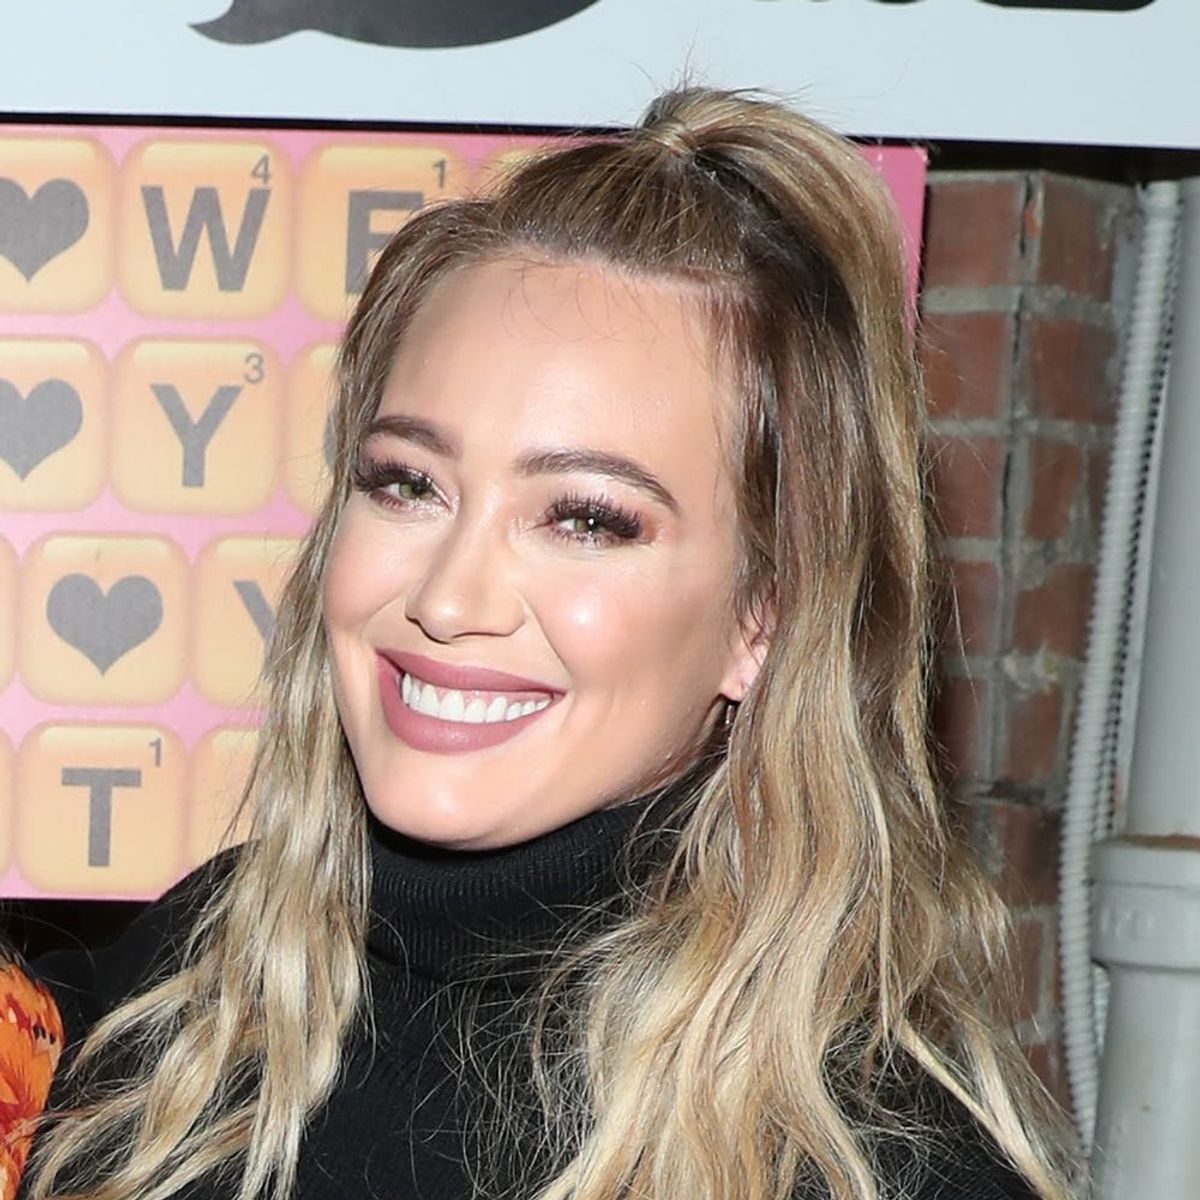 This Is the Meaning Behind Hilary Duff’s Newest Tattoo